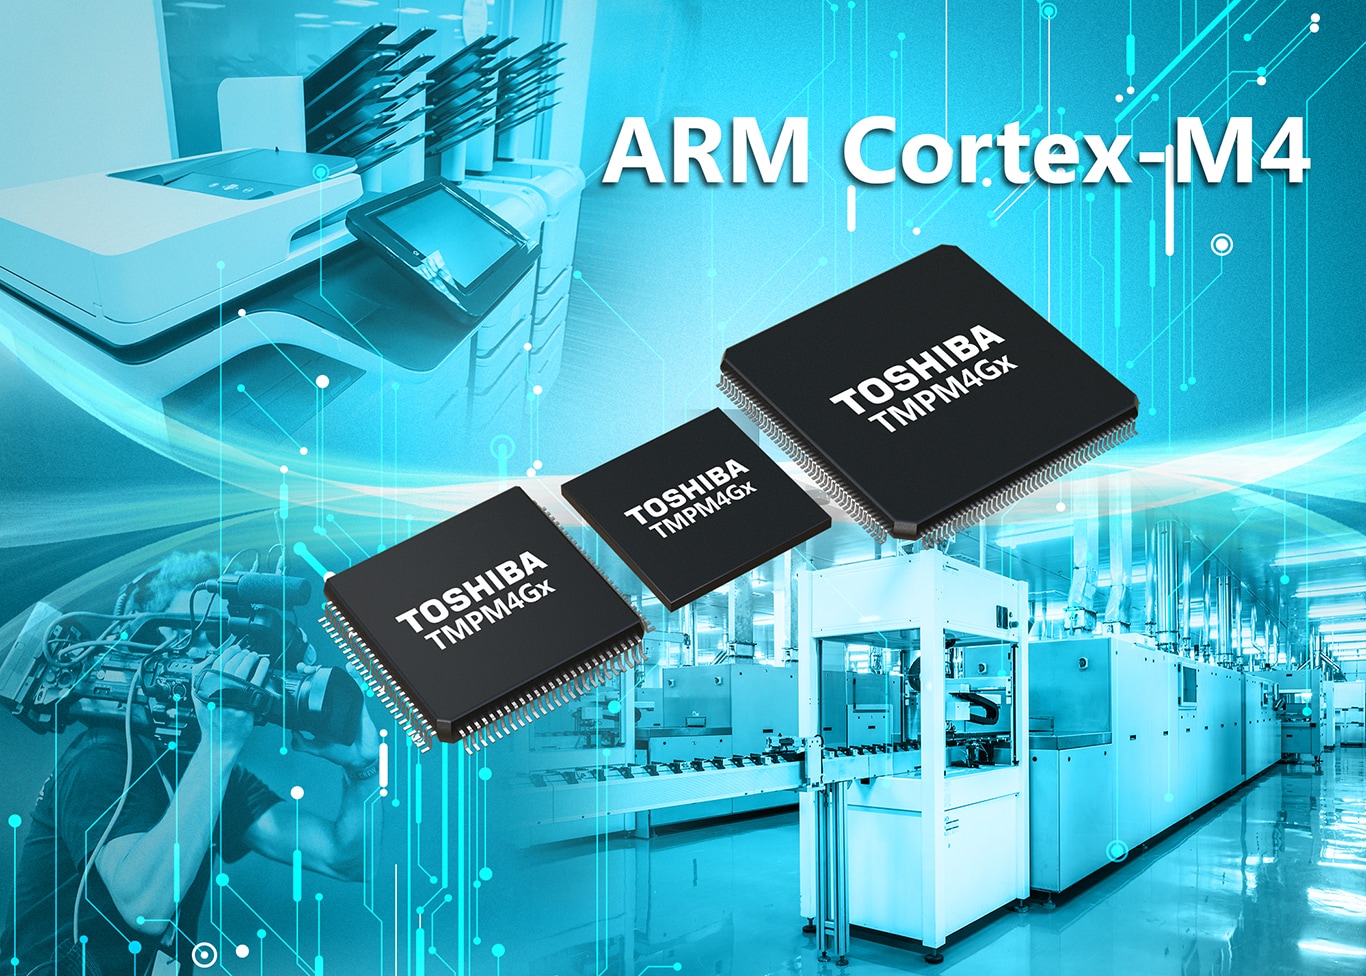 Toshiba’s ARM® Cortex®-M4-based Microcontrollers deliver high-speed data processing